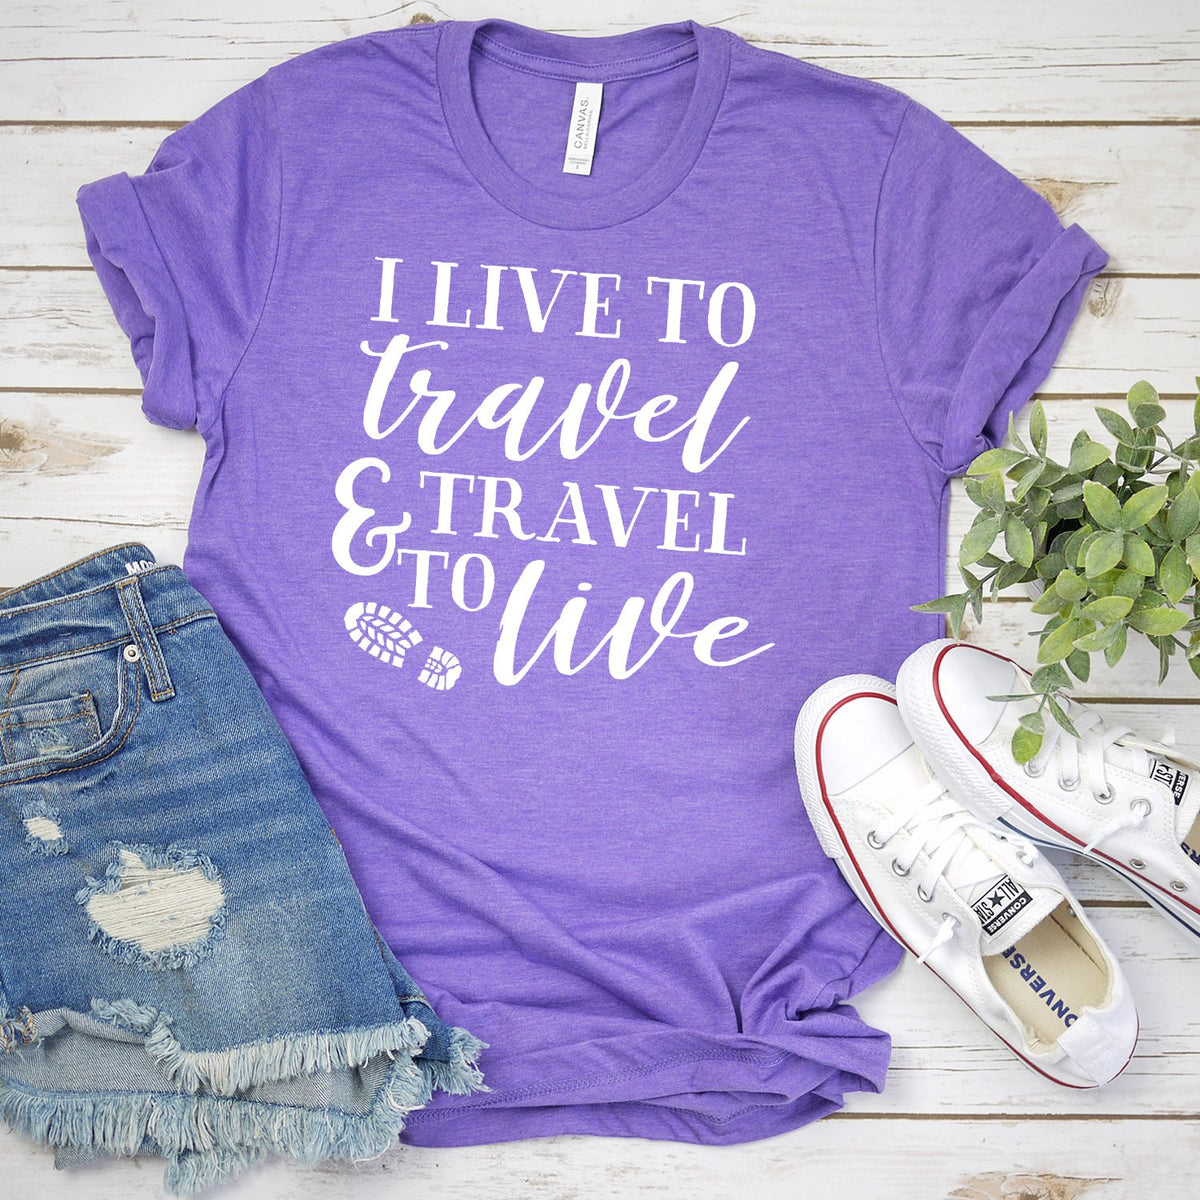 I Live to Travel &amp; Travel to Live - Short Sleeve Tee Shirt